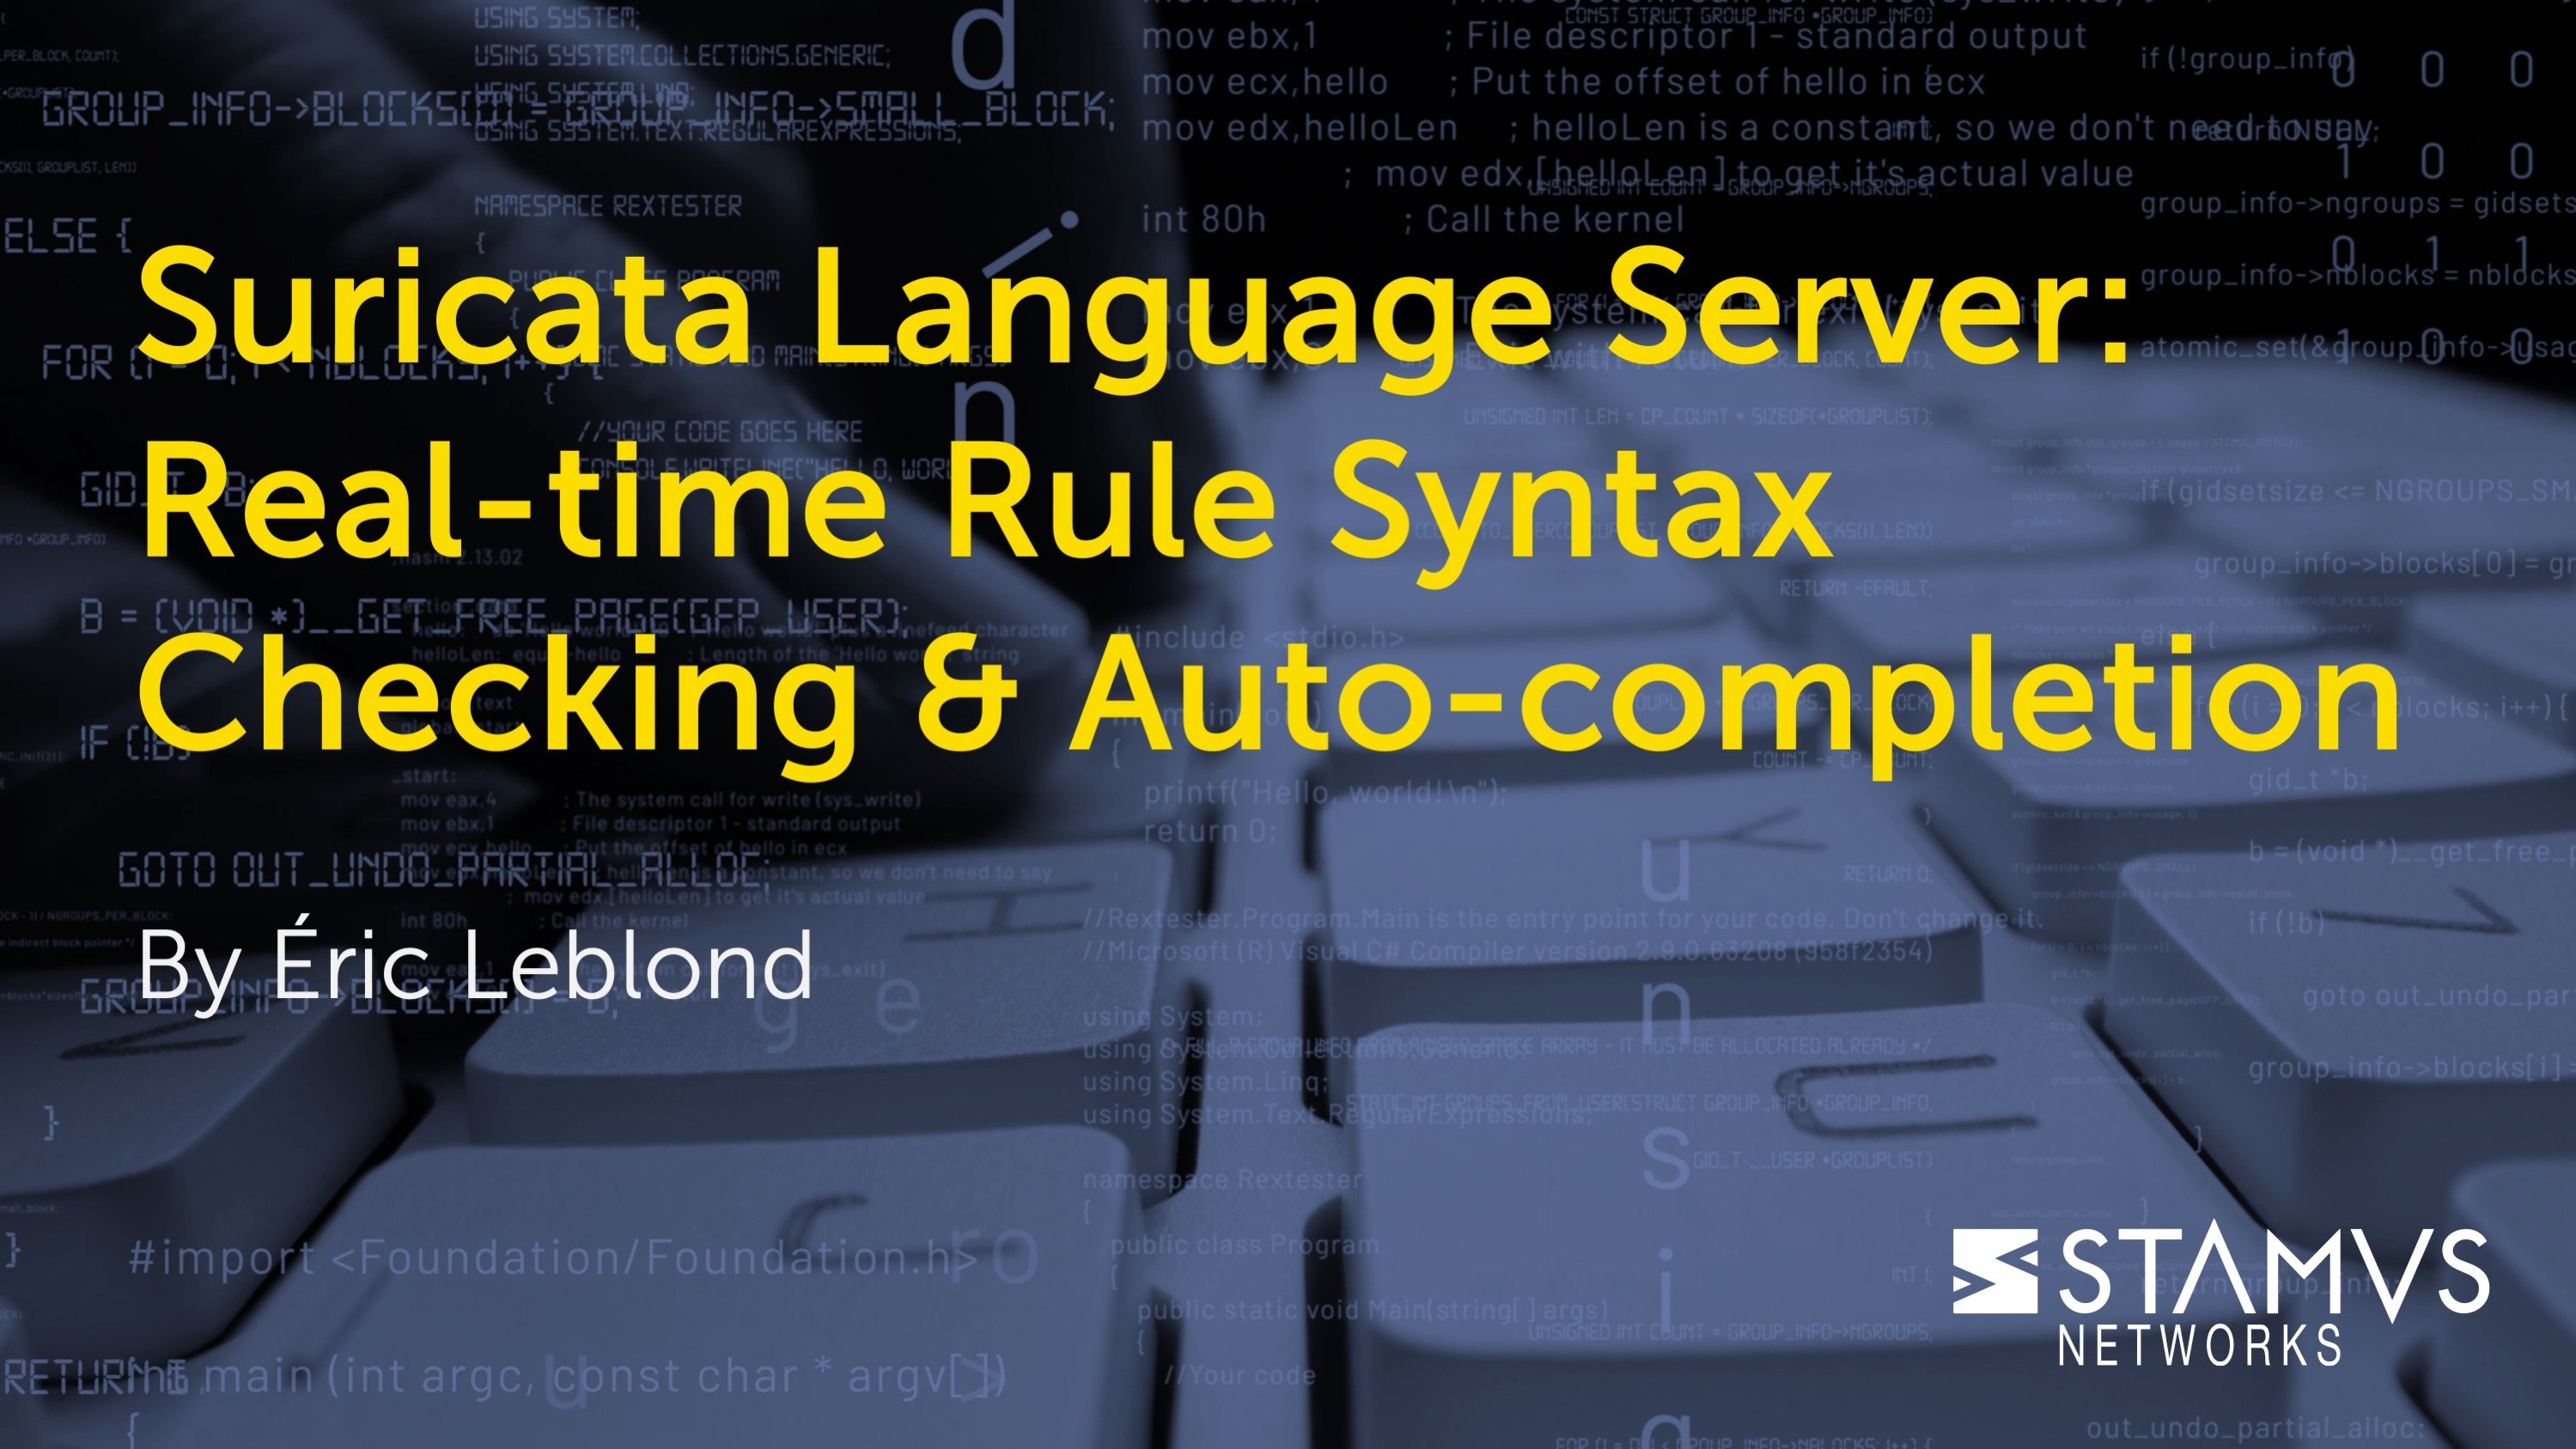 Stamus Blog | Introducing Suricata Language Server: Real-time Rule Syntax Checking and Auto-completion